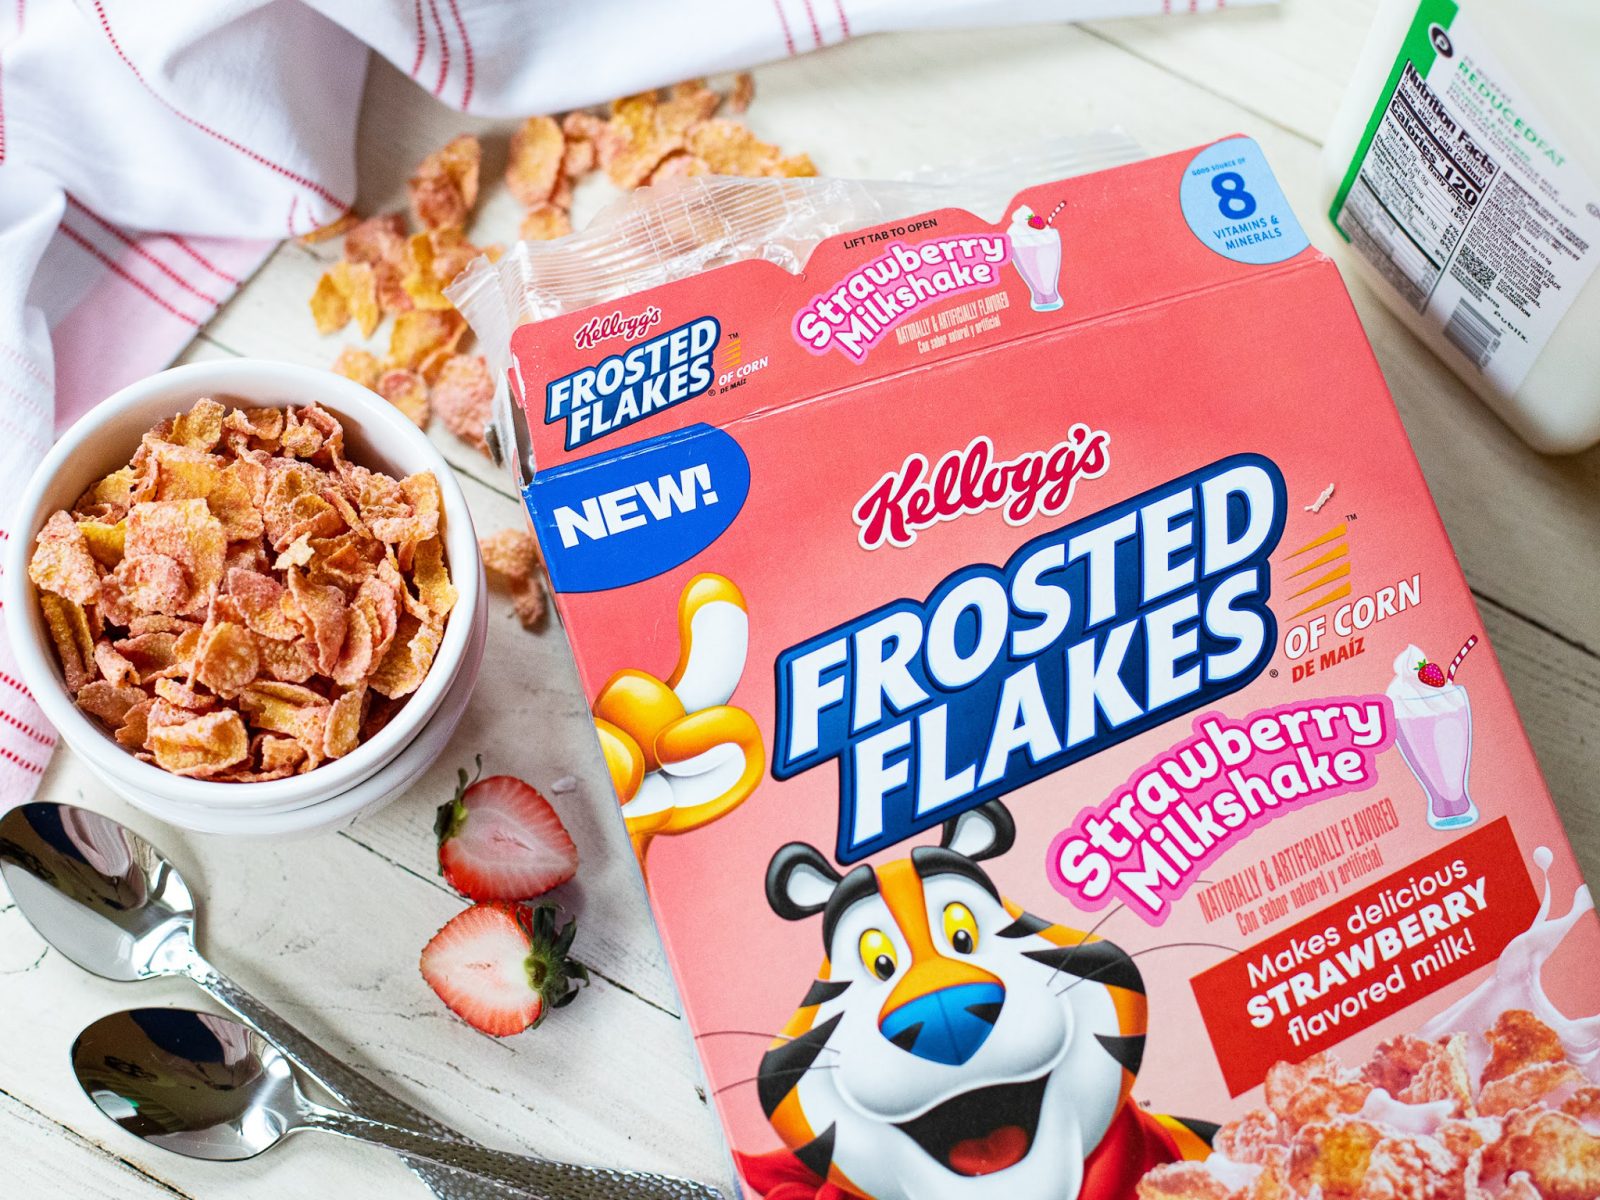 Grab Kellogg’s Cereal & Save – Boxes As Low As $2.20 At Publix